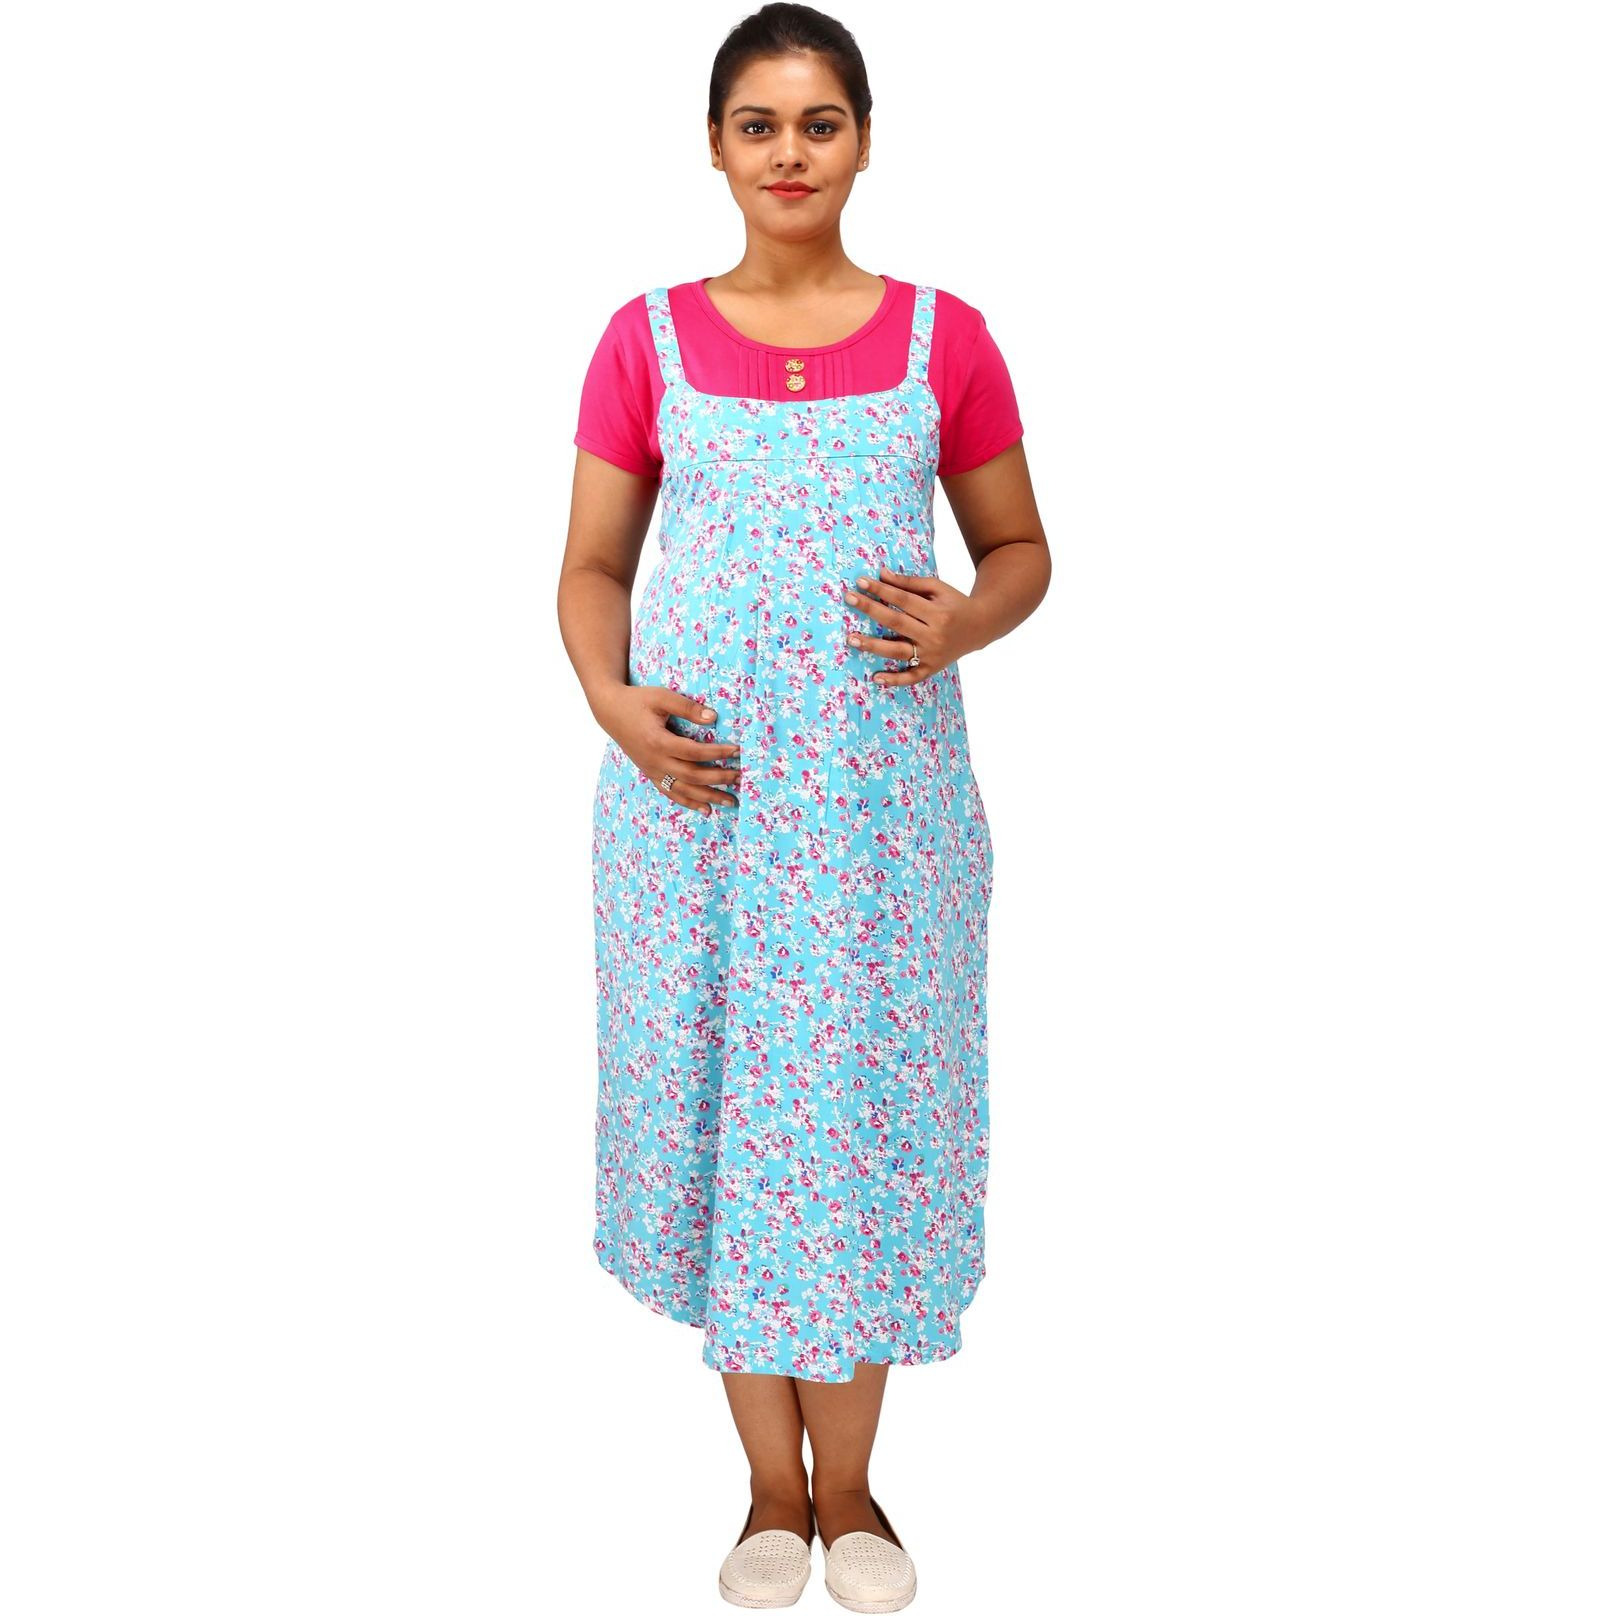 Mamma's Maternity Women's Printed Pink and Blue Maternity Dress (Size:L)